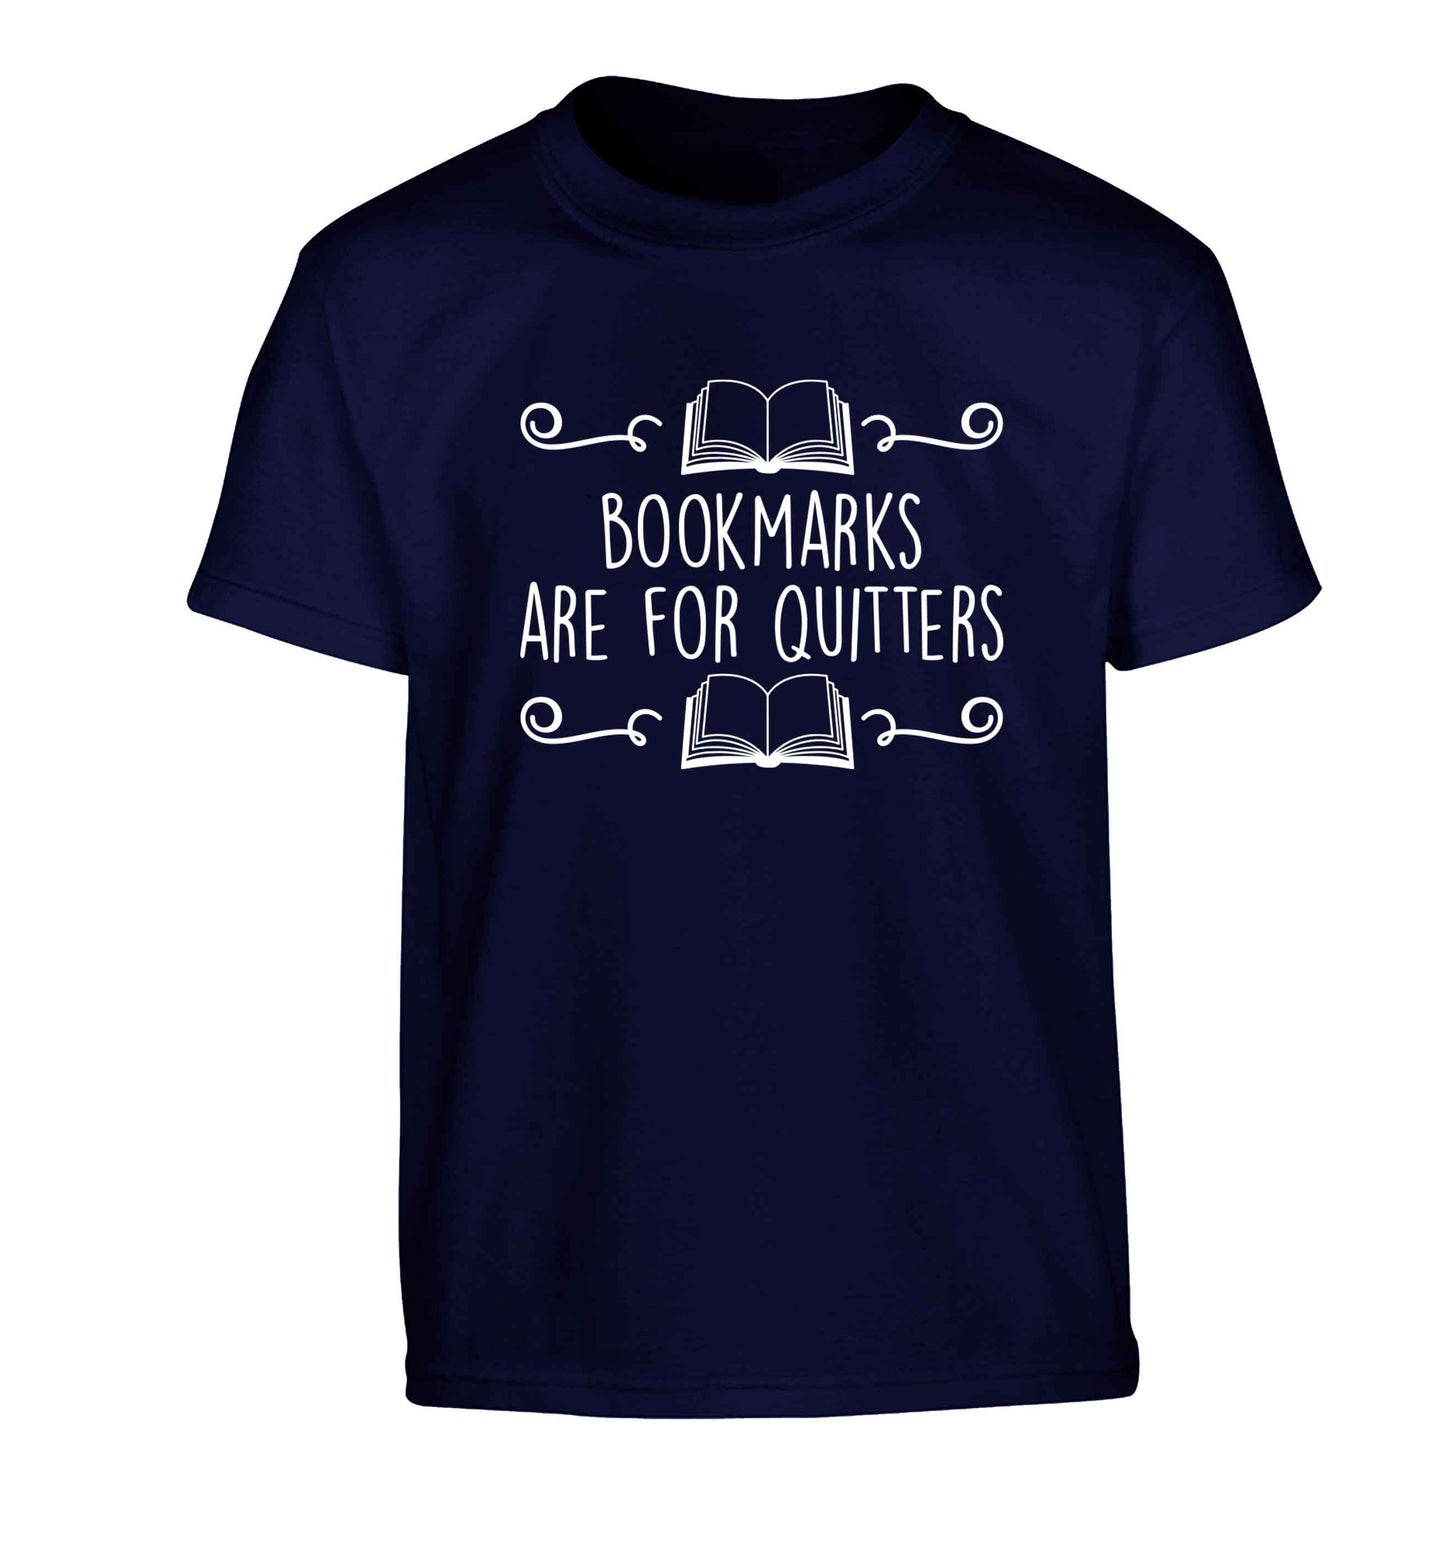 Bookmarks are for quitters Children's navy Tshirt 12-13 Years